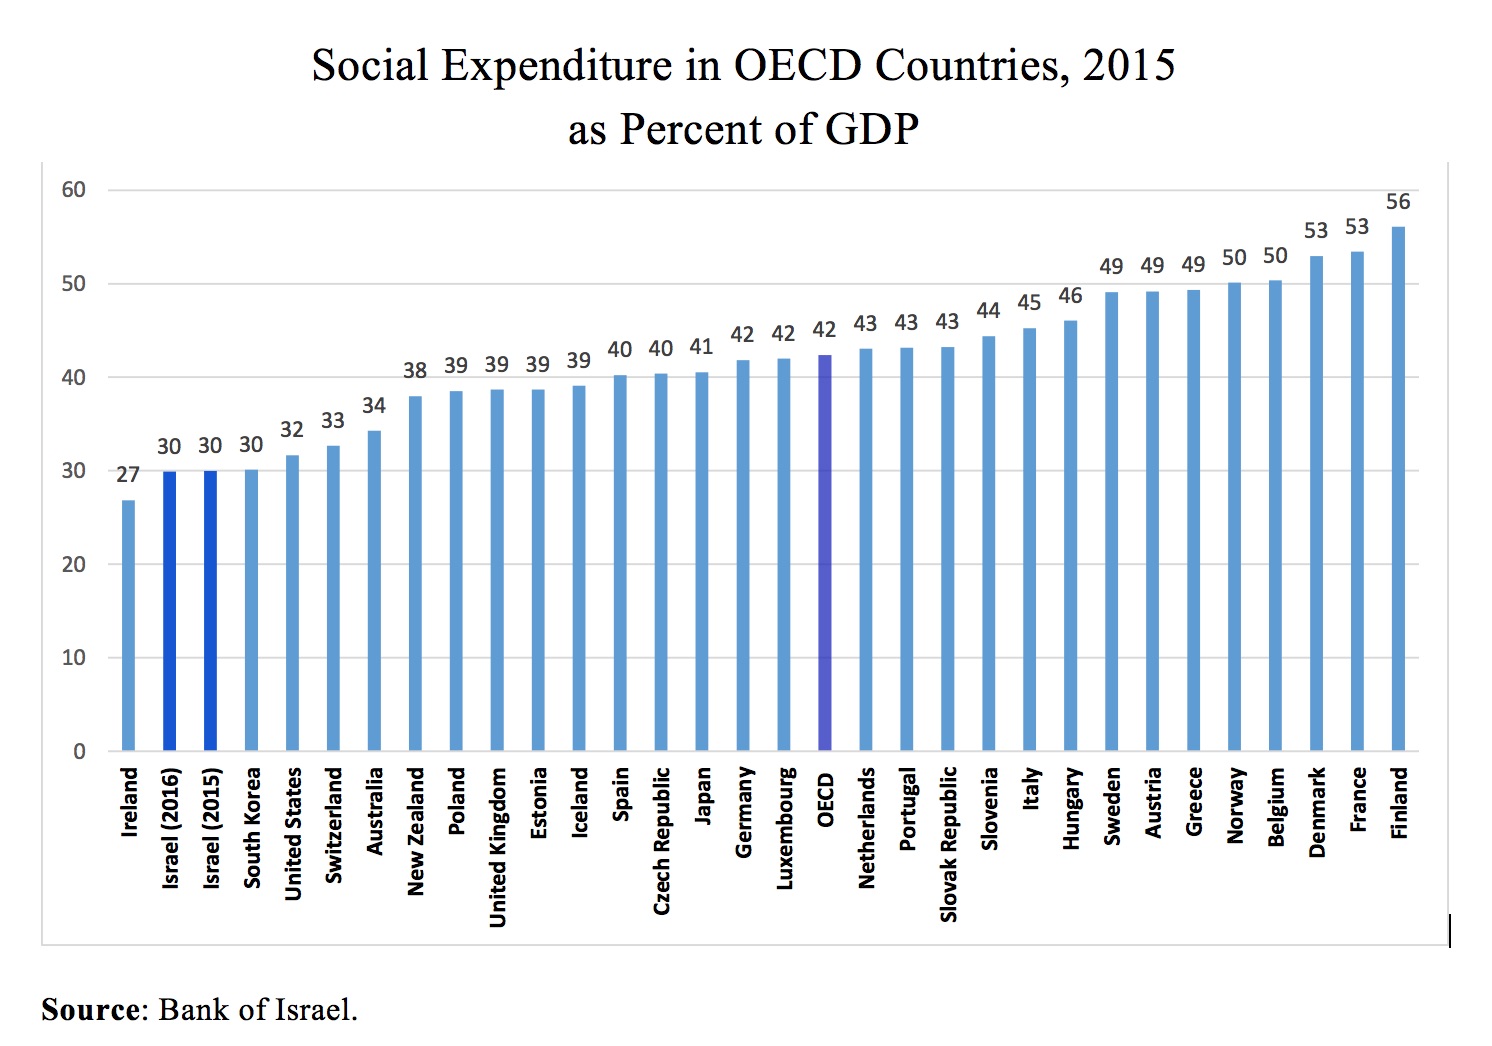 Israel's social expenditure as a percent of GDP last year was one of the lowest amongst members of the OECD. According to the Bank of Israel, these numbers testify to the difficulty the government faces when it comes to instituting policy measures aimed at ensuring long-term economic growth.